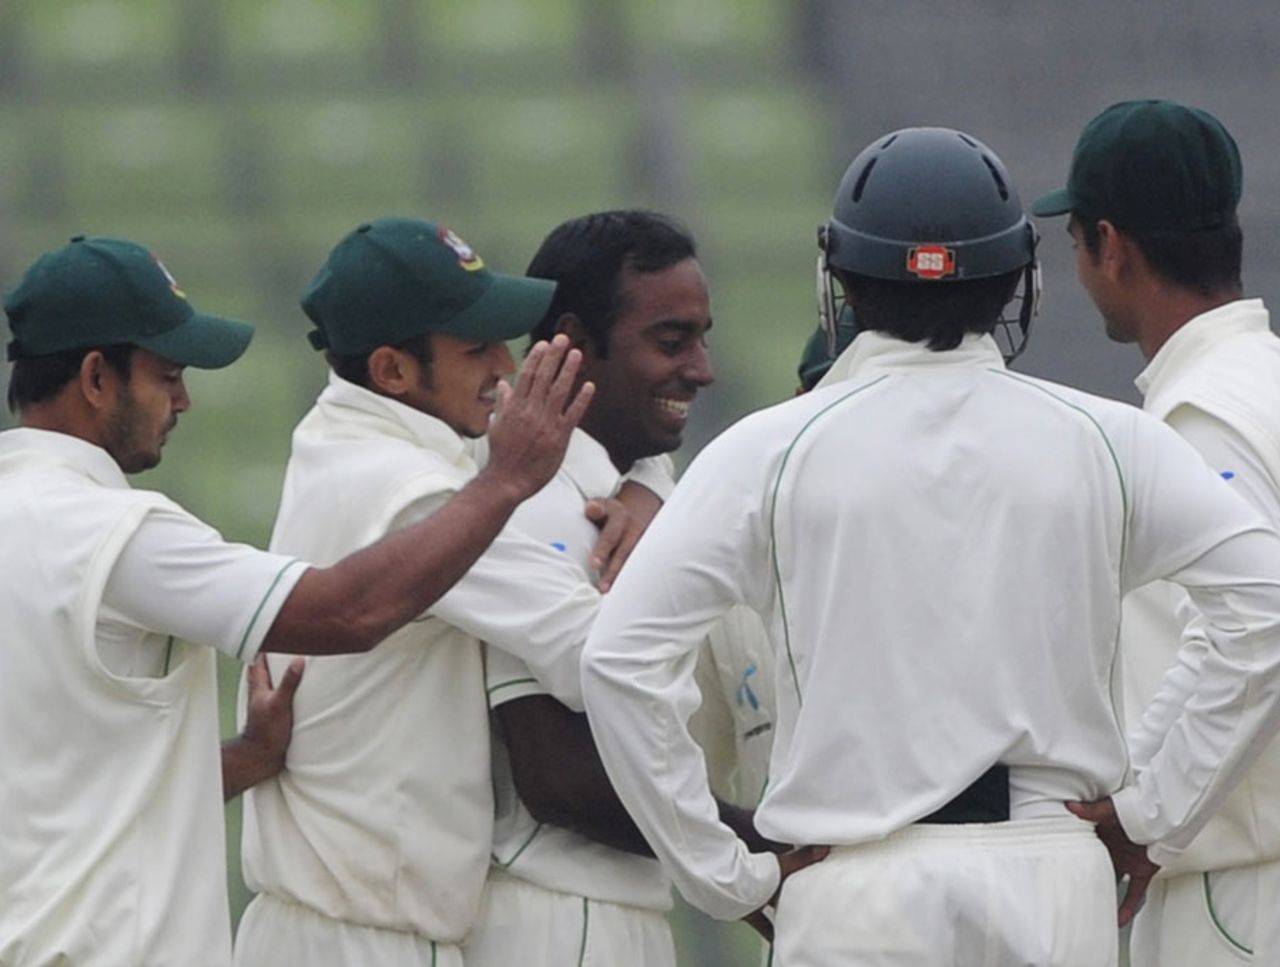 Elias Sunny is congratulated after dismissing Younis Khan, Bangladesh v Pakistan, 2nd Test, Mirpur, 4th day, December 20, 2011 